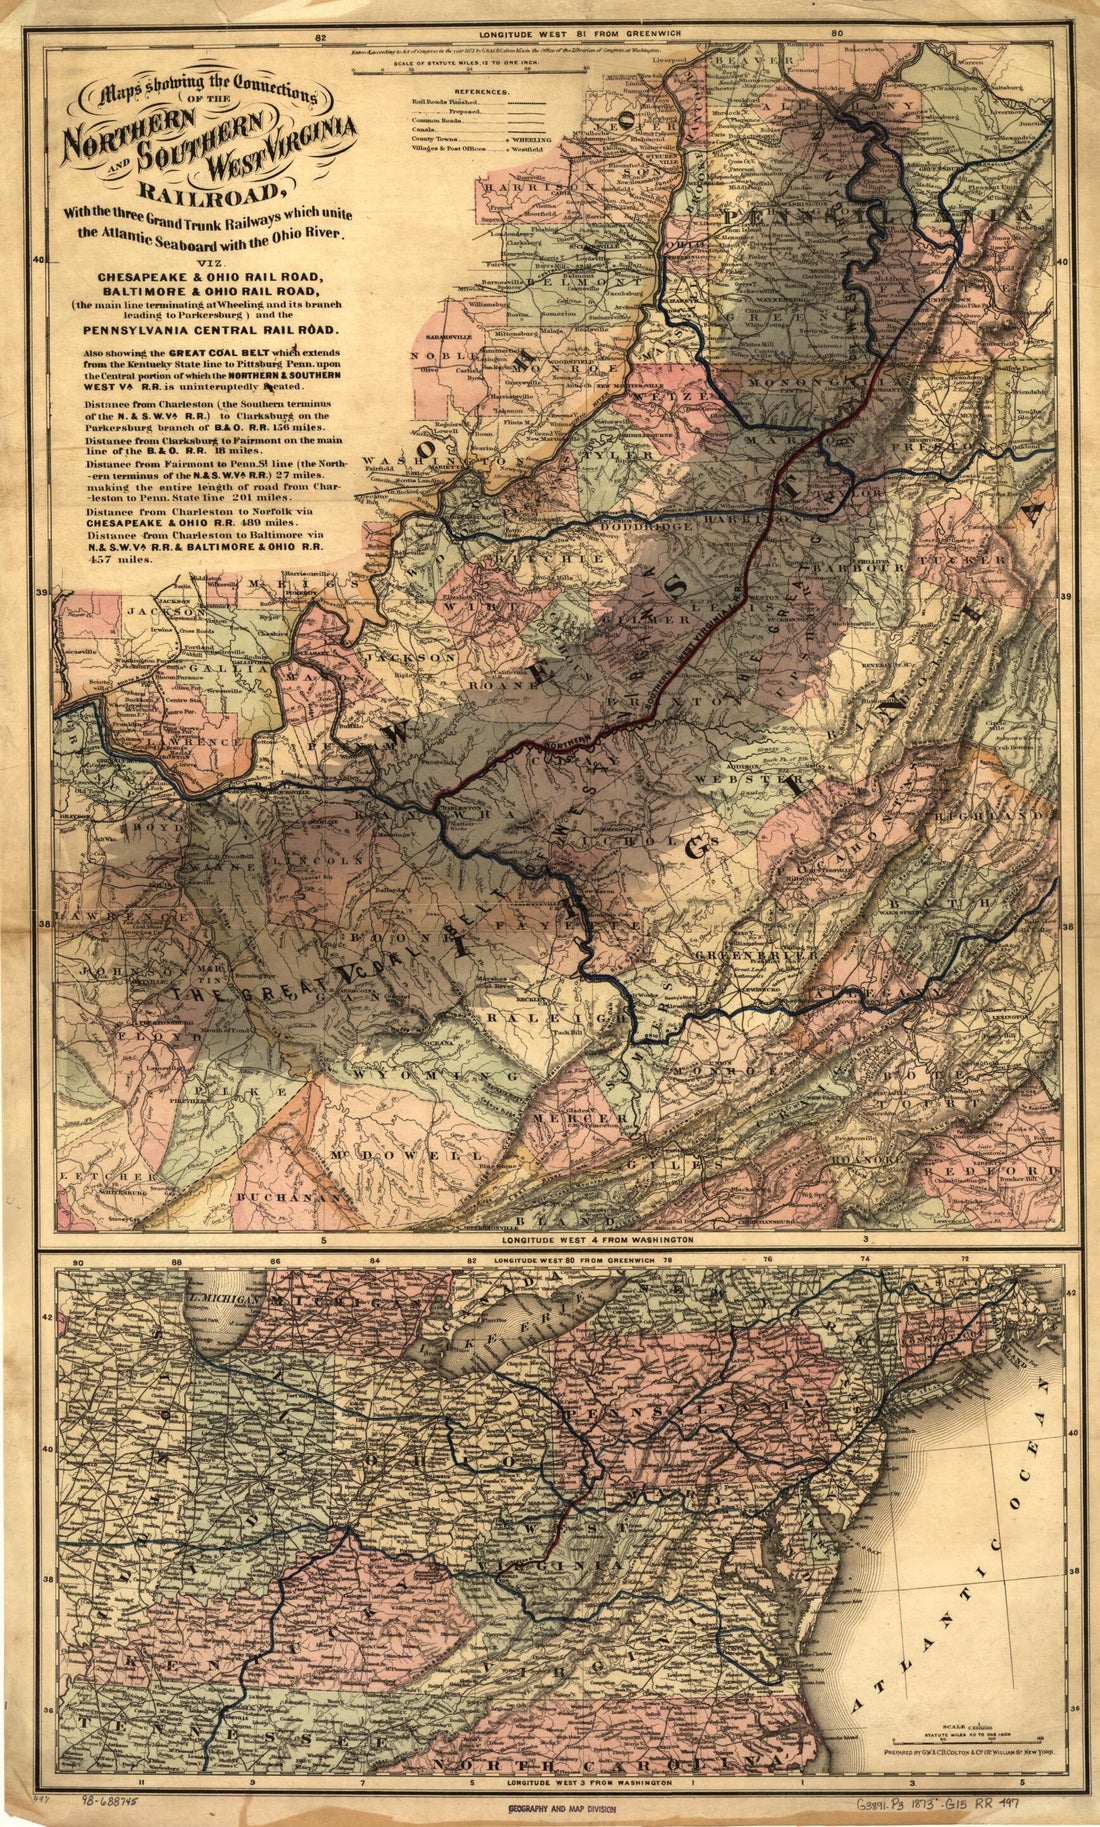 This old map of Maps Showing the Connections of the Northern and Southern West Virginia Railroad, With the Three Grand Trunk Railways Which Unite the Atlantic Seaboard With the Ohio River from 1873 was created by  G.W. &amp; C.B. Colton &amp; Co,  Northern and S